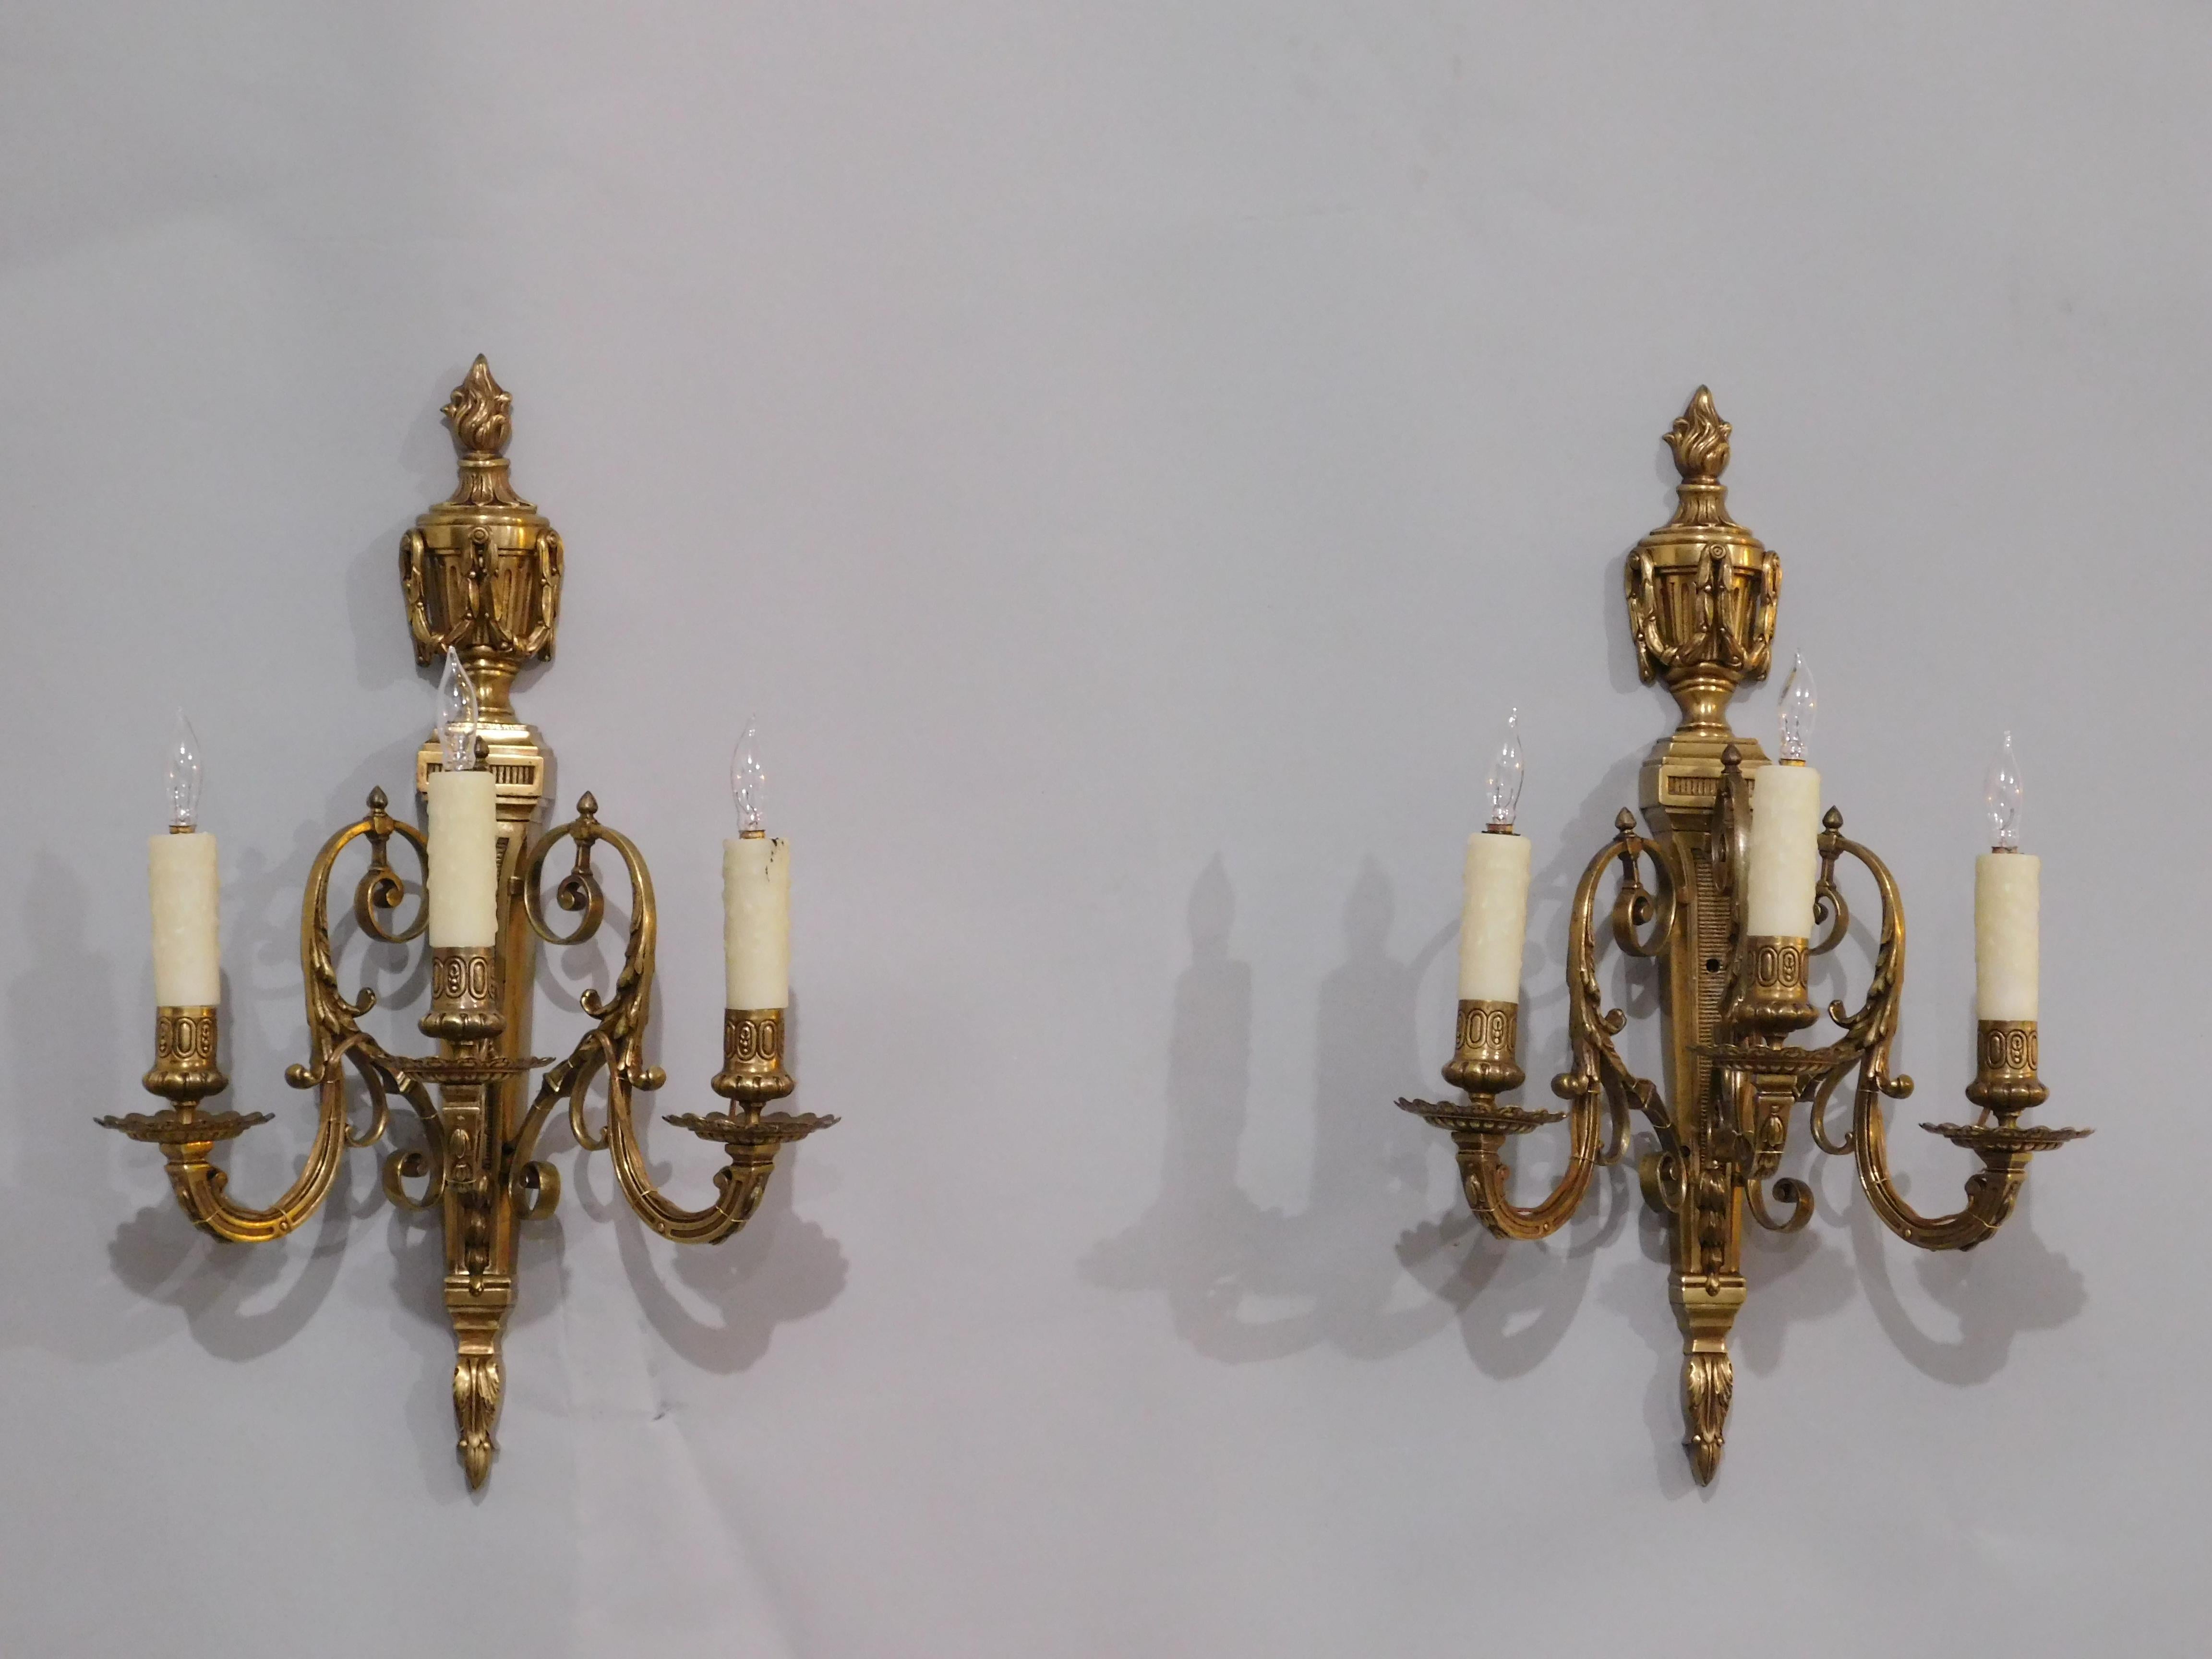 Pair of French Neoclassical Cast Brass 3-Light Wall Sconces.  Luminaire bracket shaped shaft with horizontal ribbed design issuing three s-shaped branches cascading foliage sprouting a detailed bobeche and candle holder, crowned with a Louis XVI